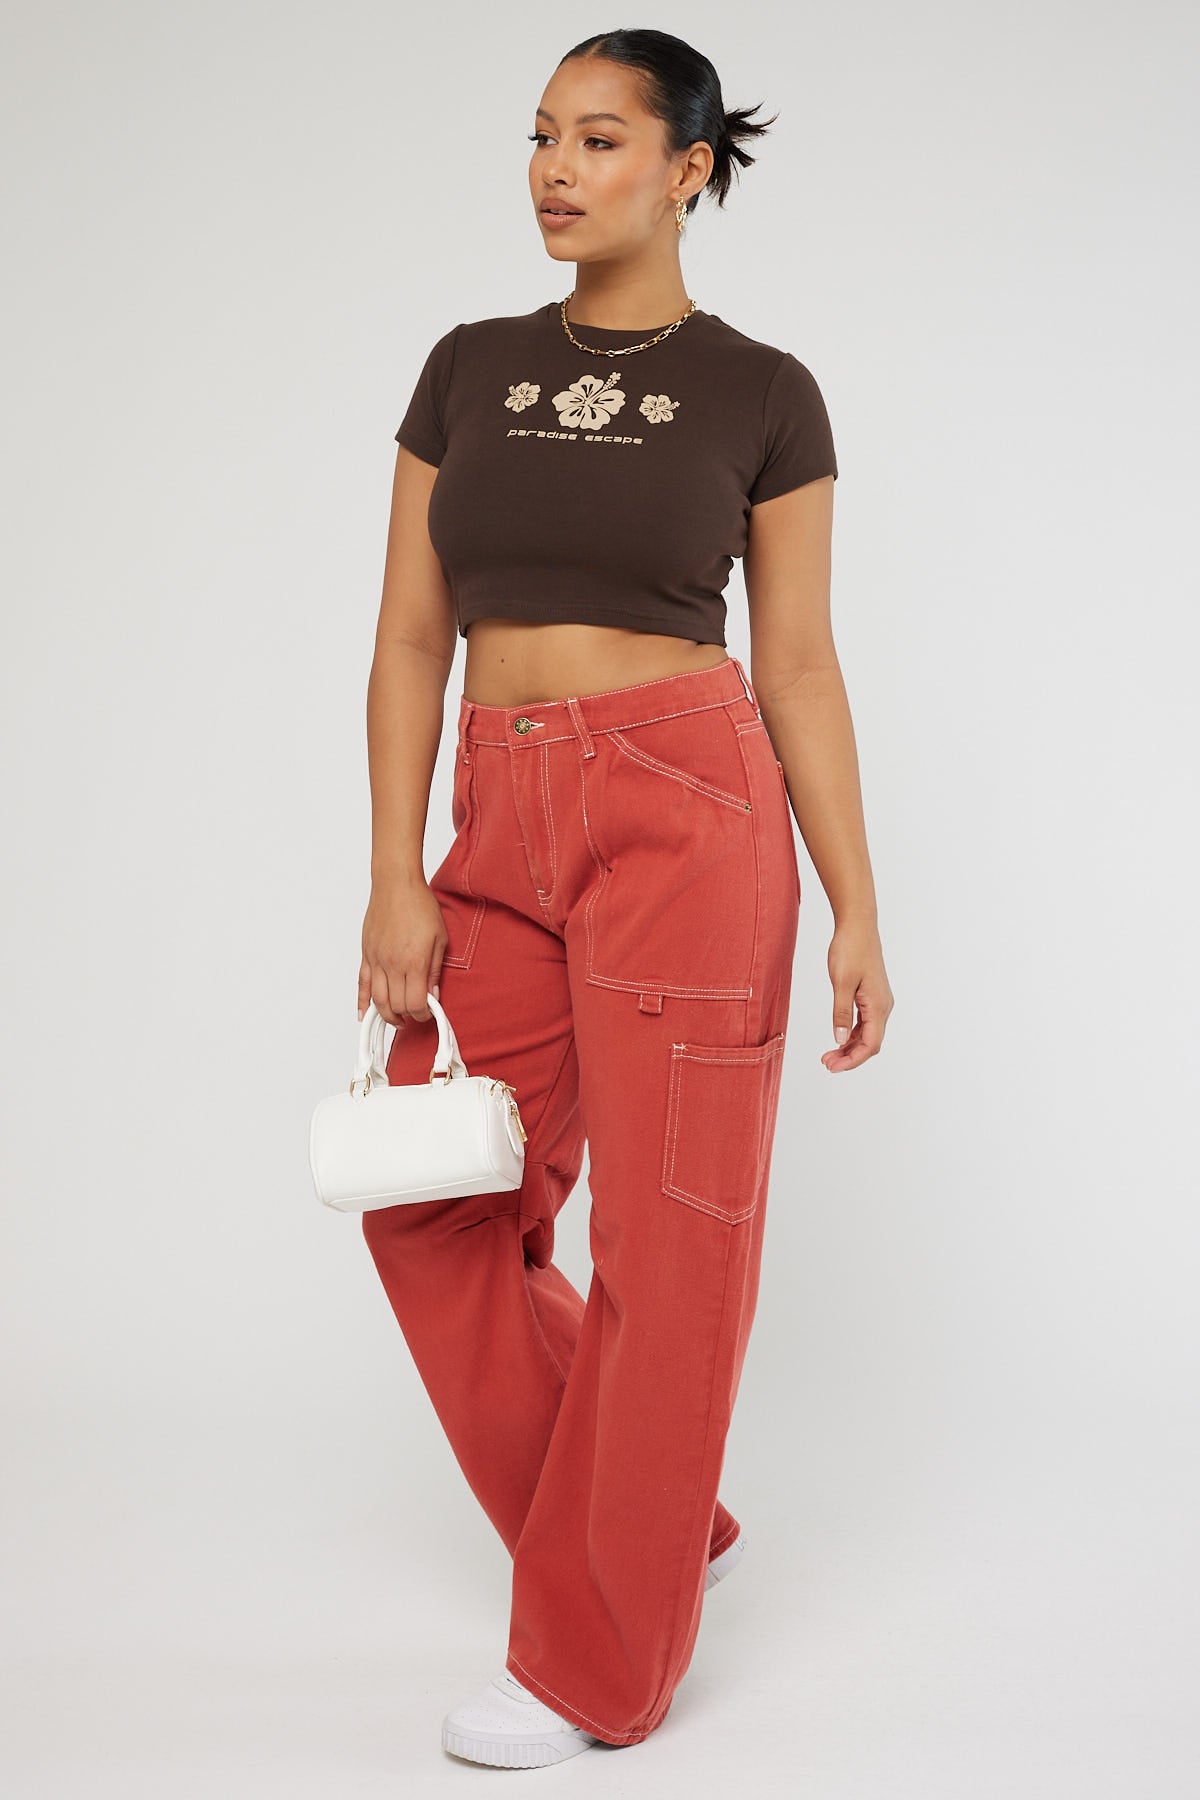 Lioness Miami Vice Pant Red